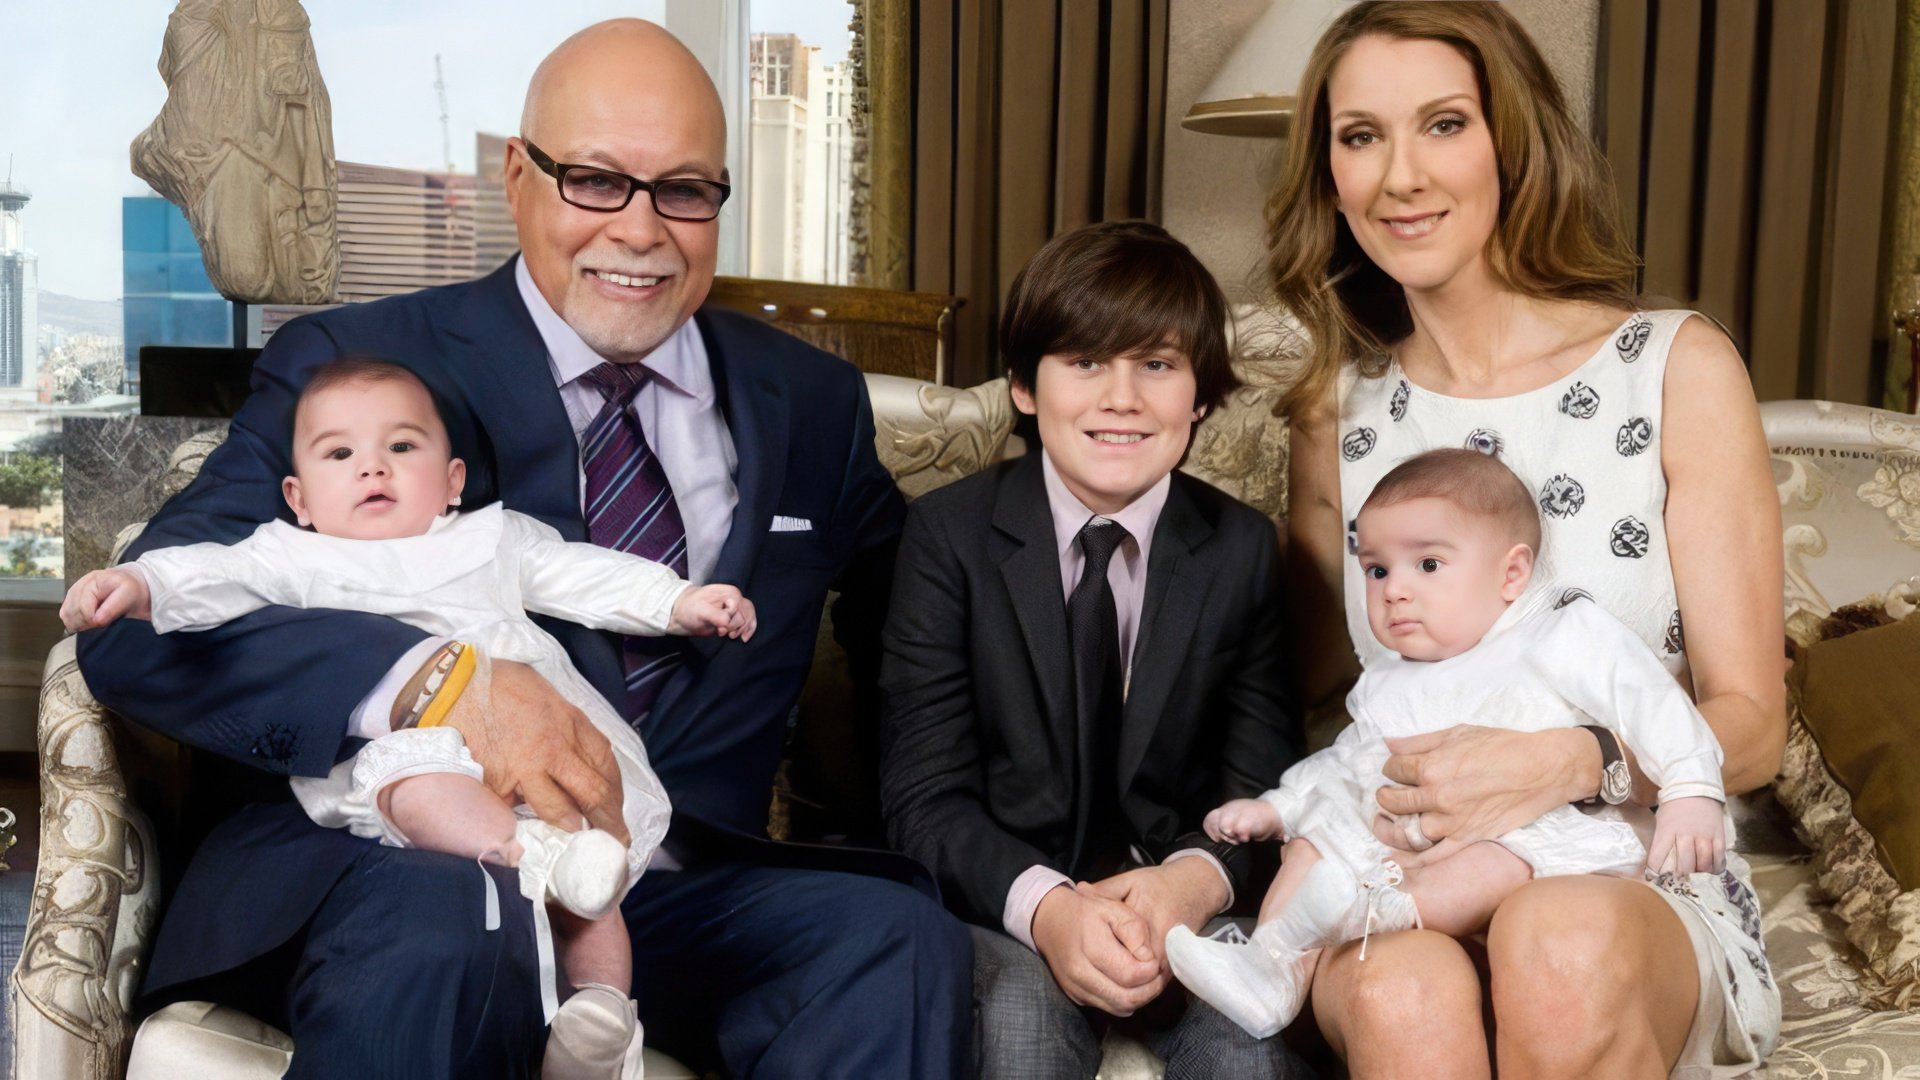 Celine Dion with her husband and children